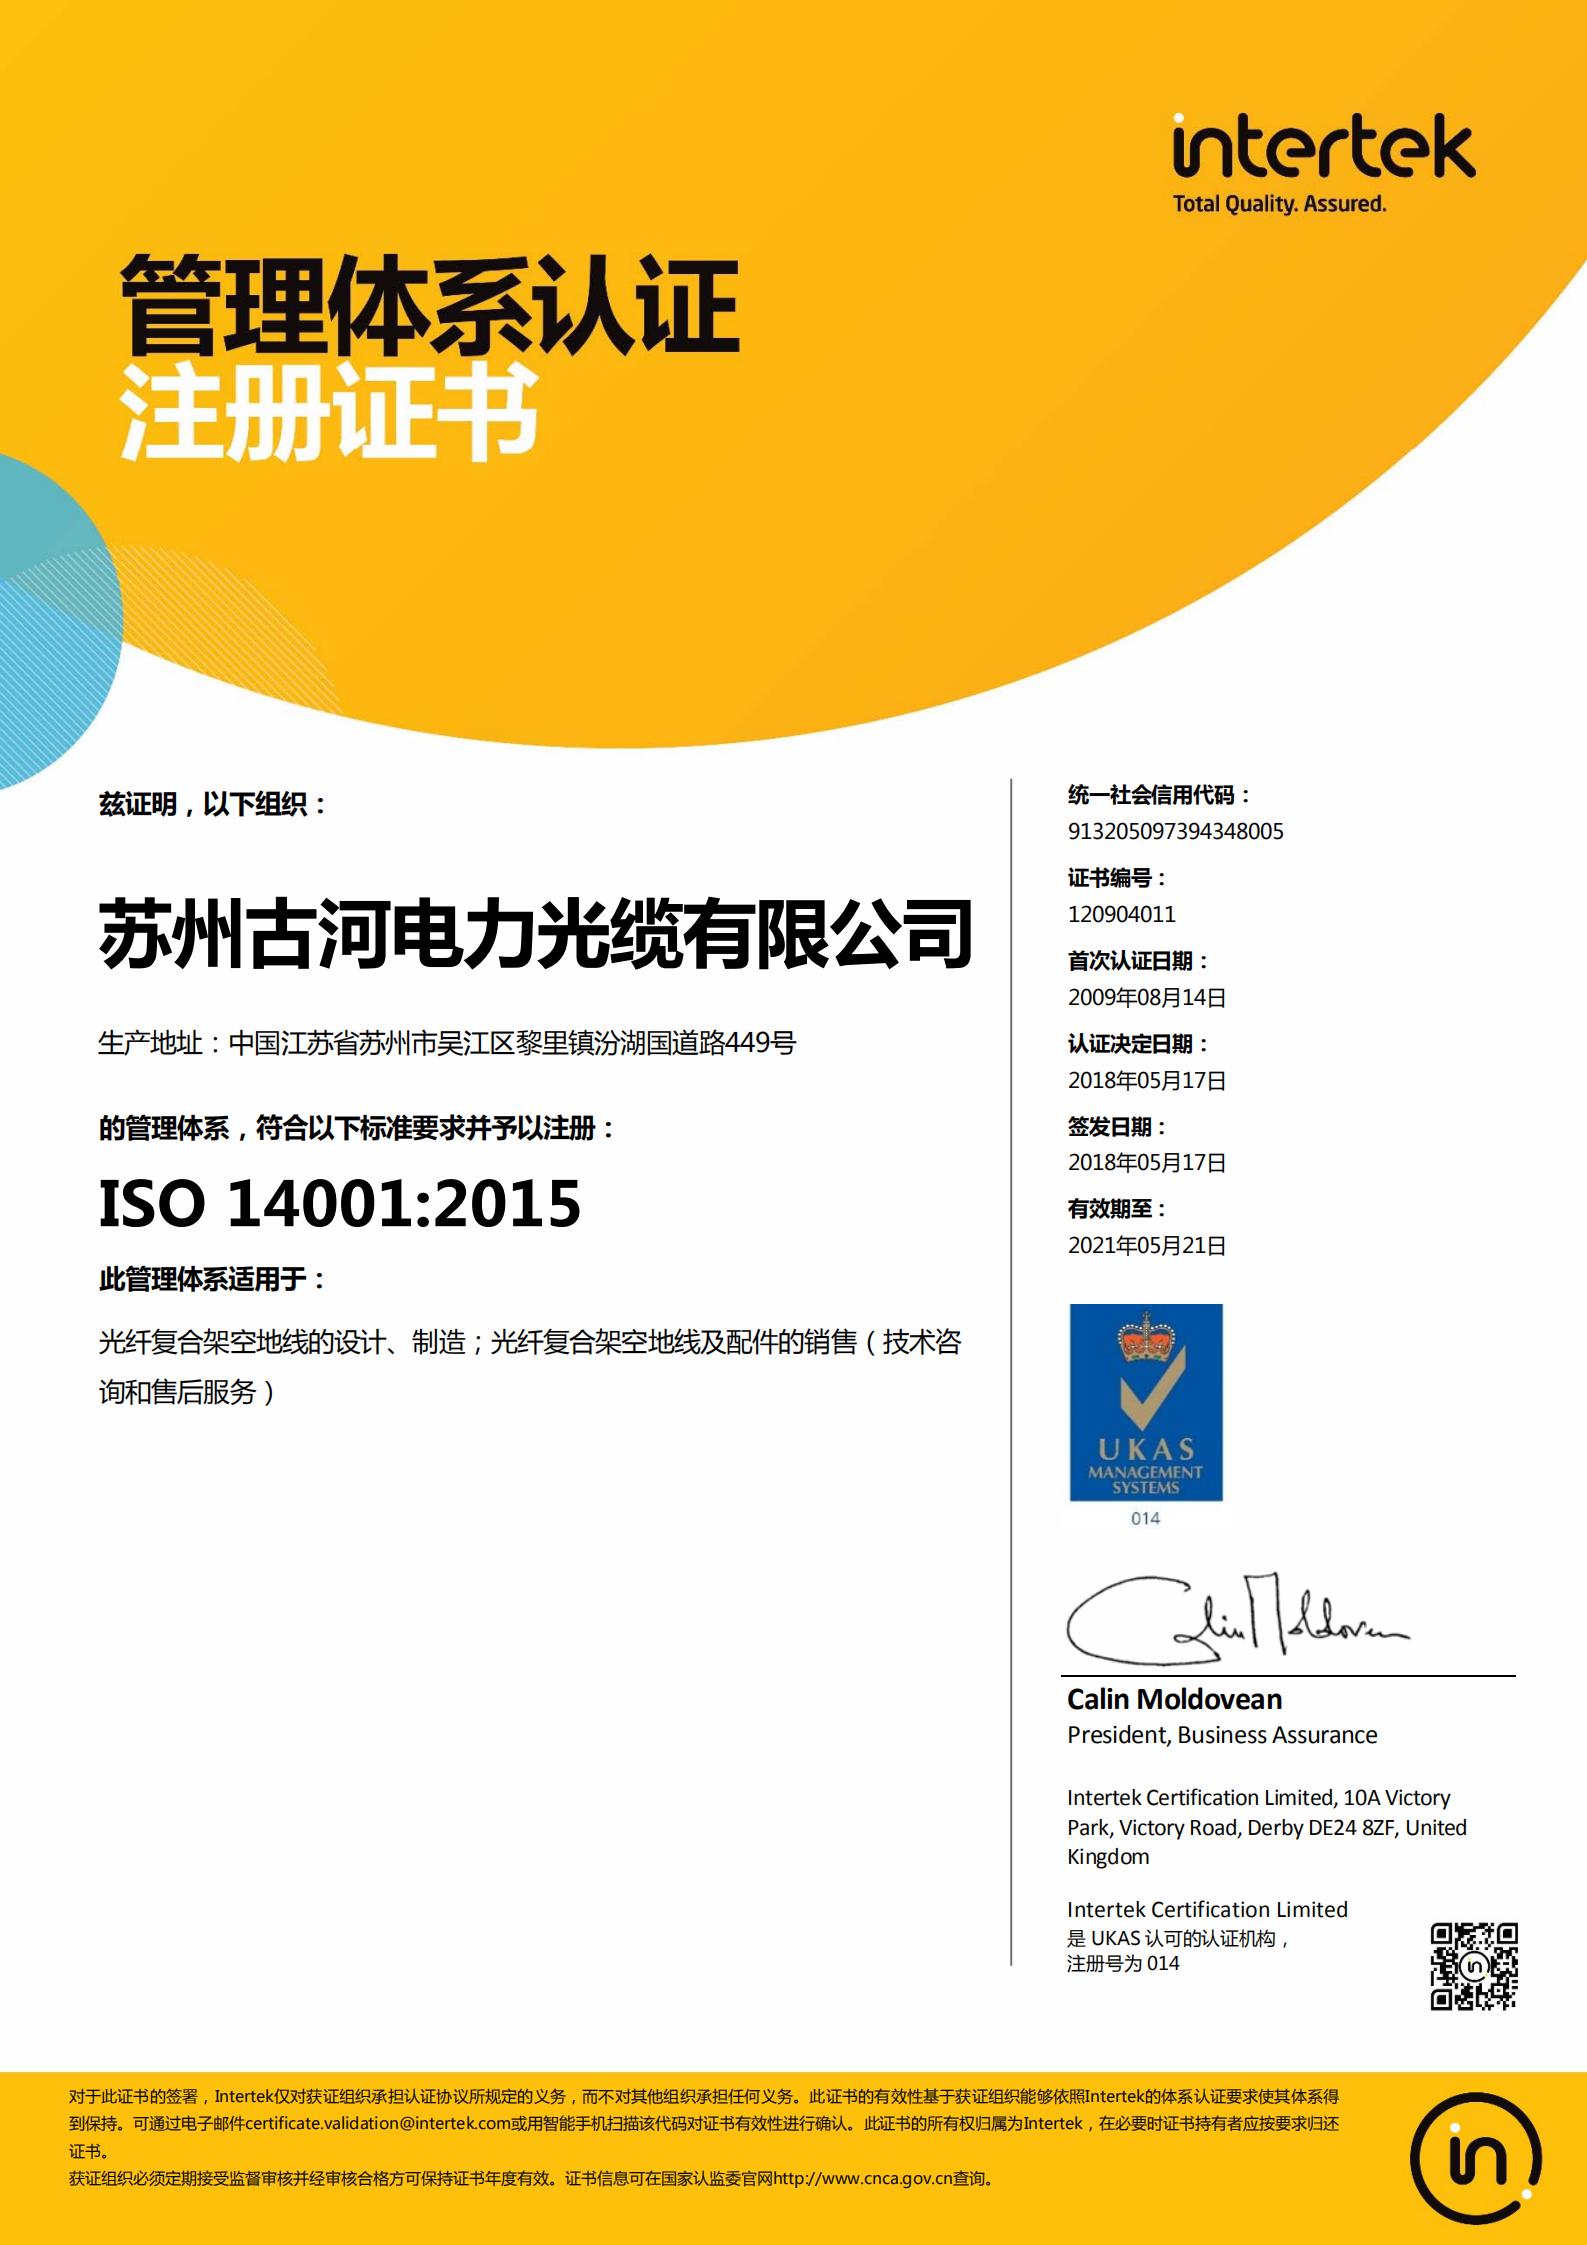 ISO14001 Certificate (2018)